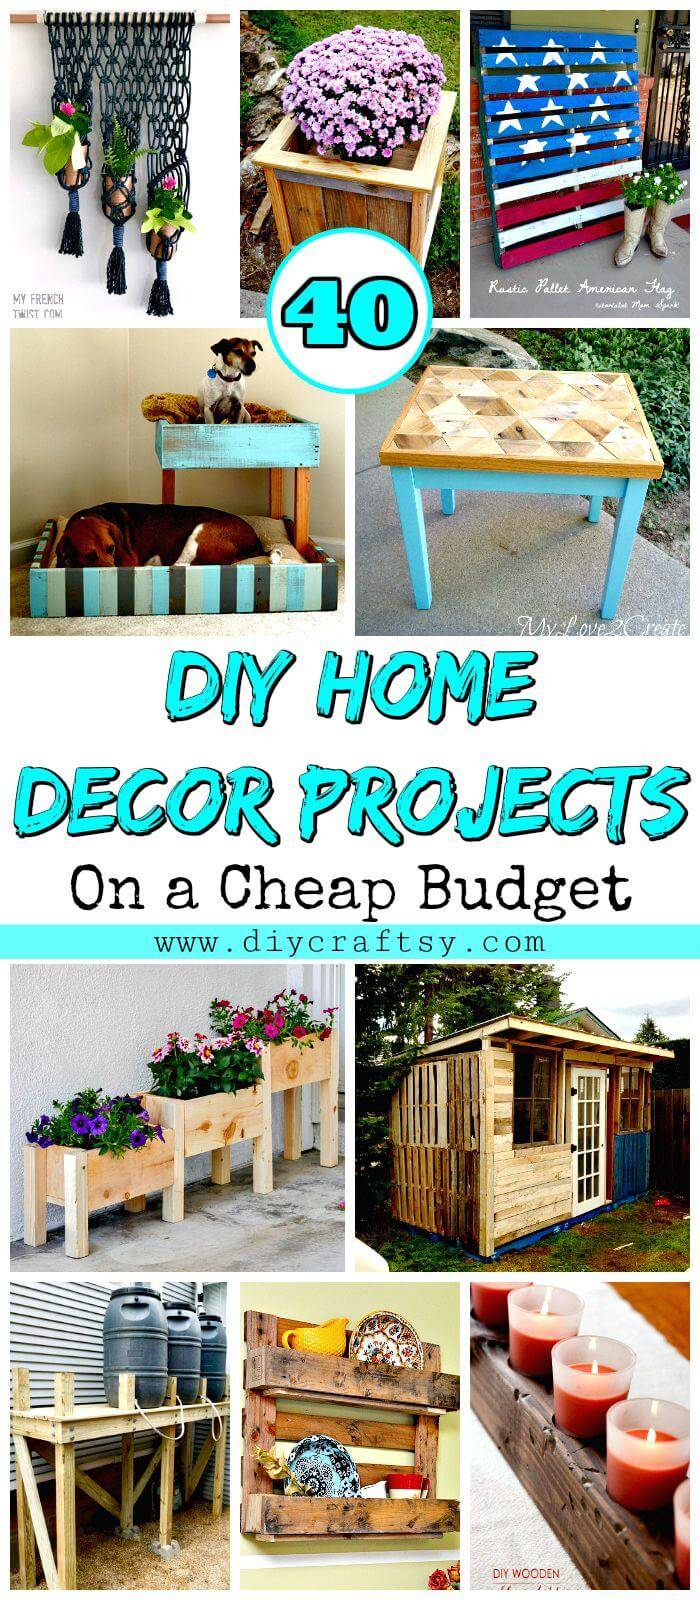 40 DIY Home Decor Projects on a Cheap Budget - DIY & Crafts